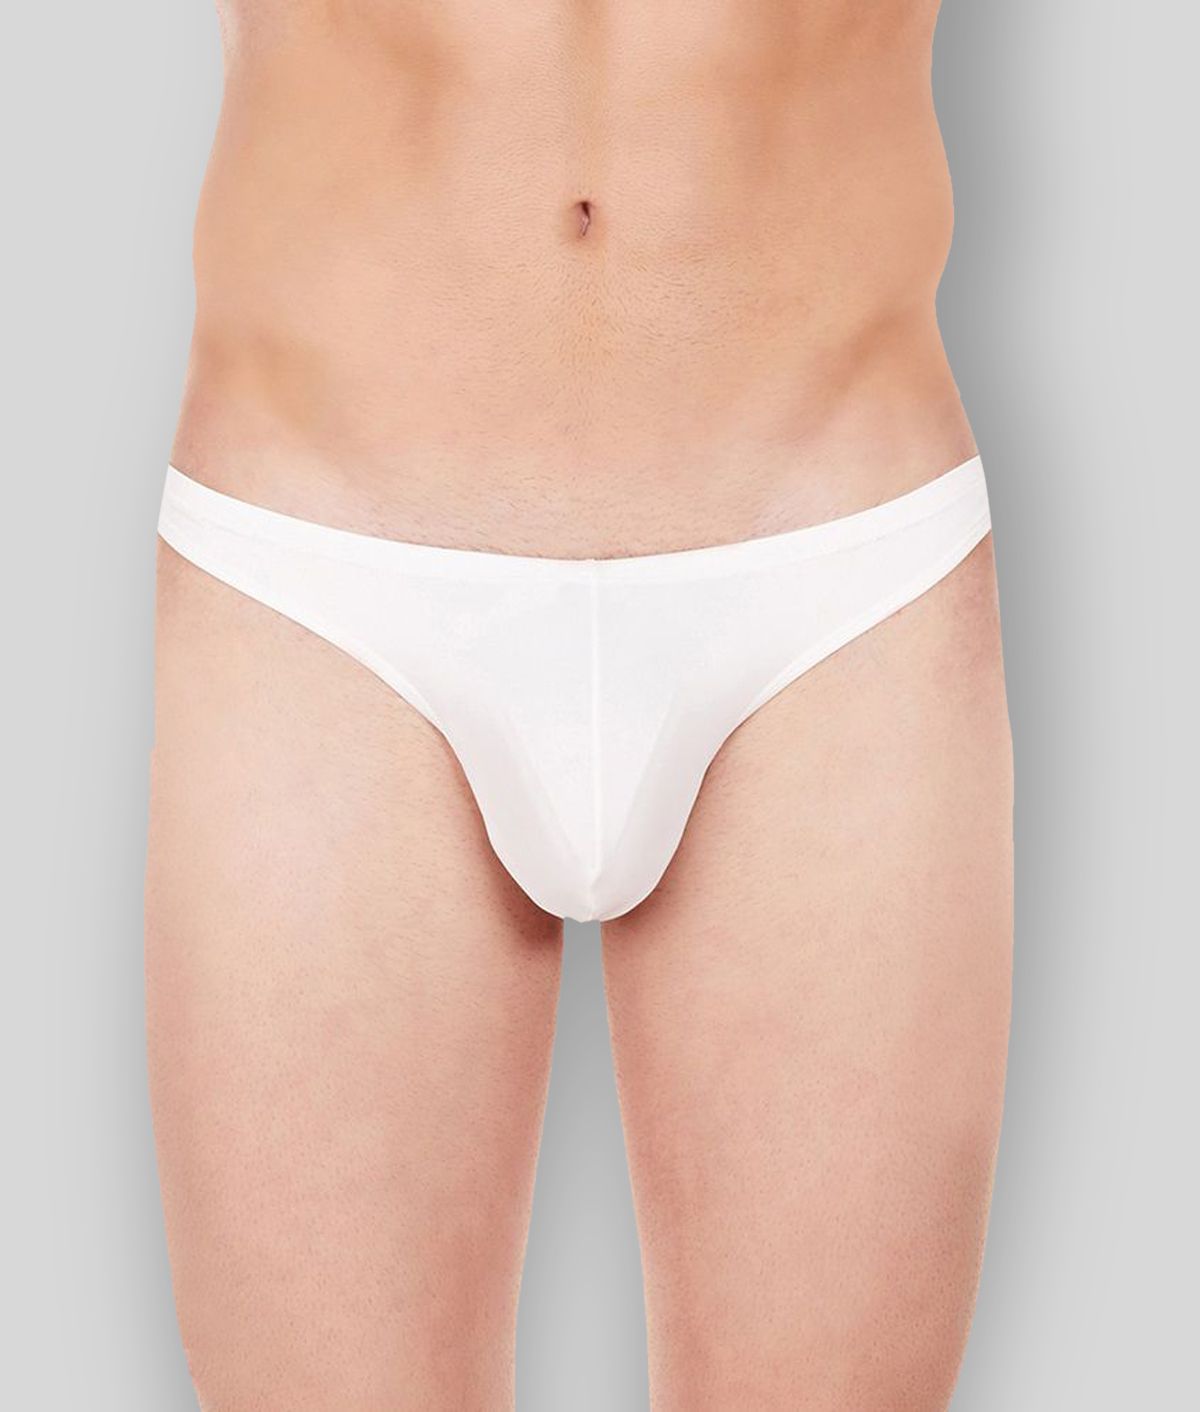 La Intimo - White Cotton Blend Men's Thongs ( Pack of 1 )